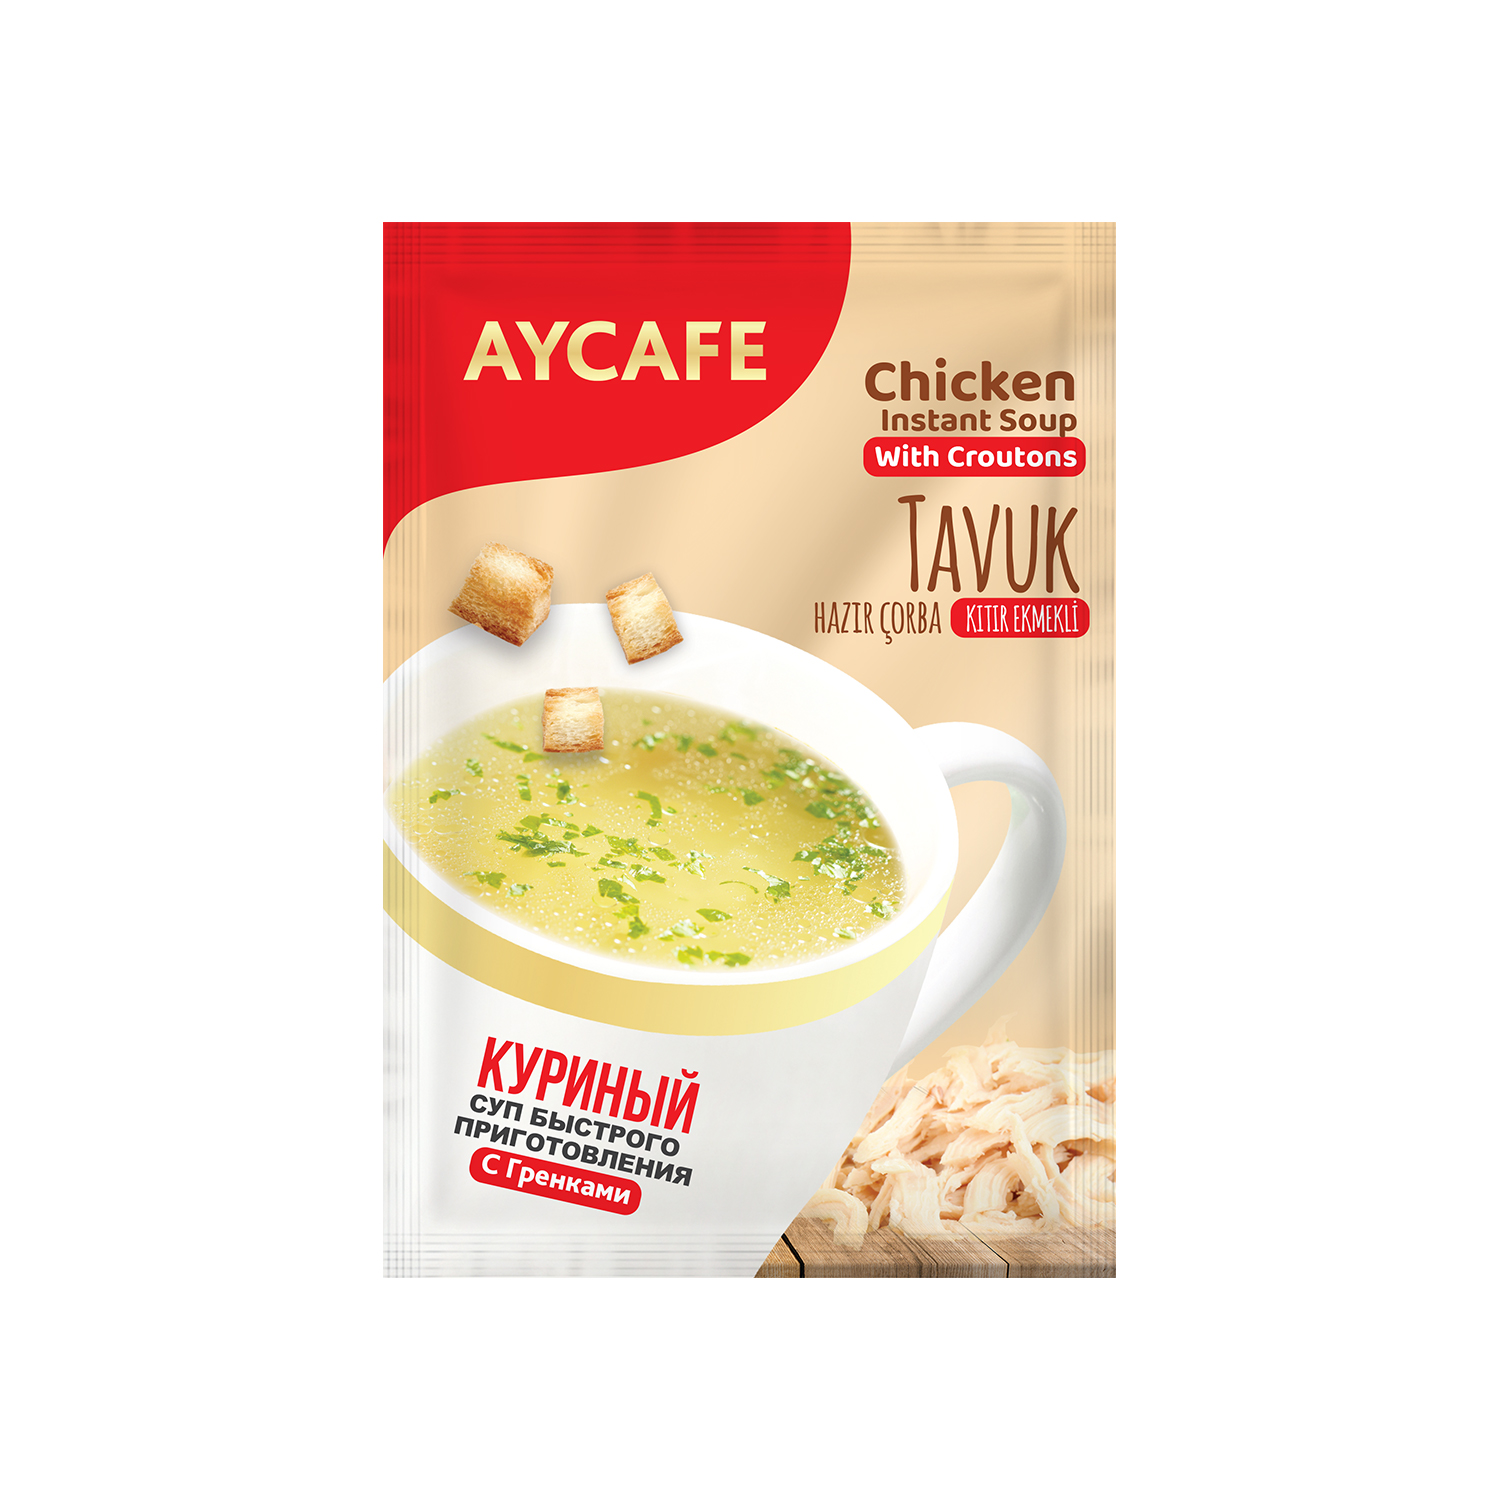 Aycafe Chicken Noodle Instant Soup In Sachets